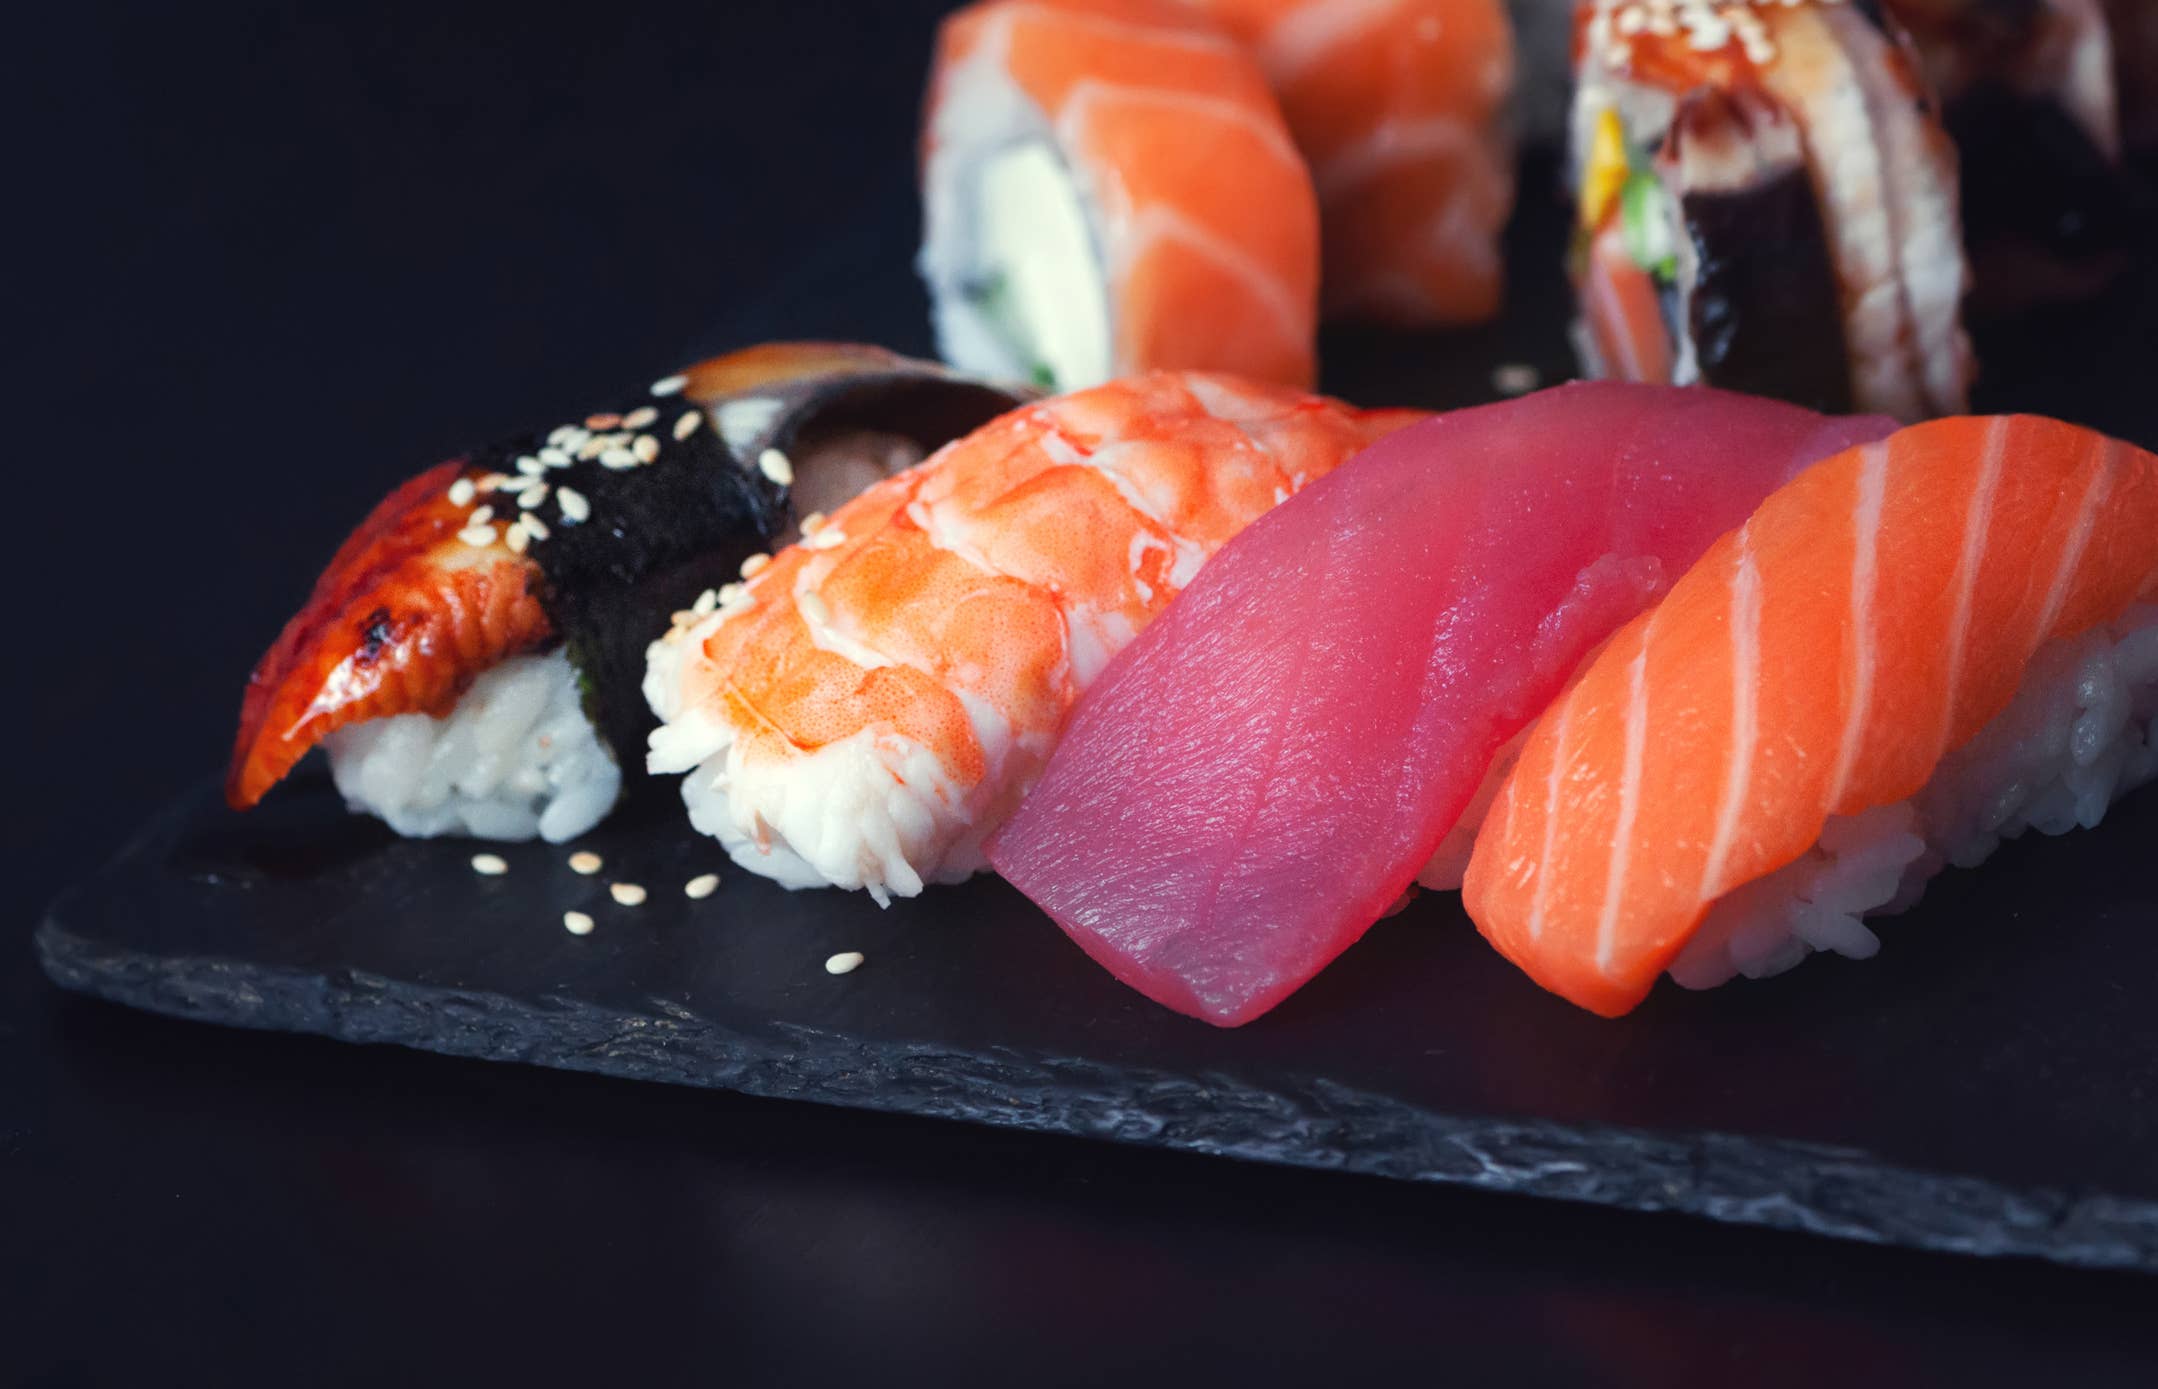 What is the traditional dipping sauce for sushi and sashimi?